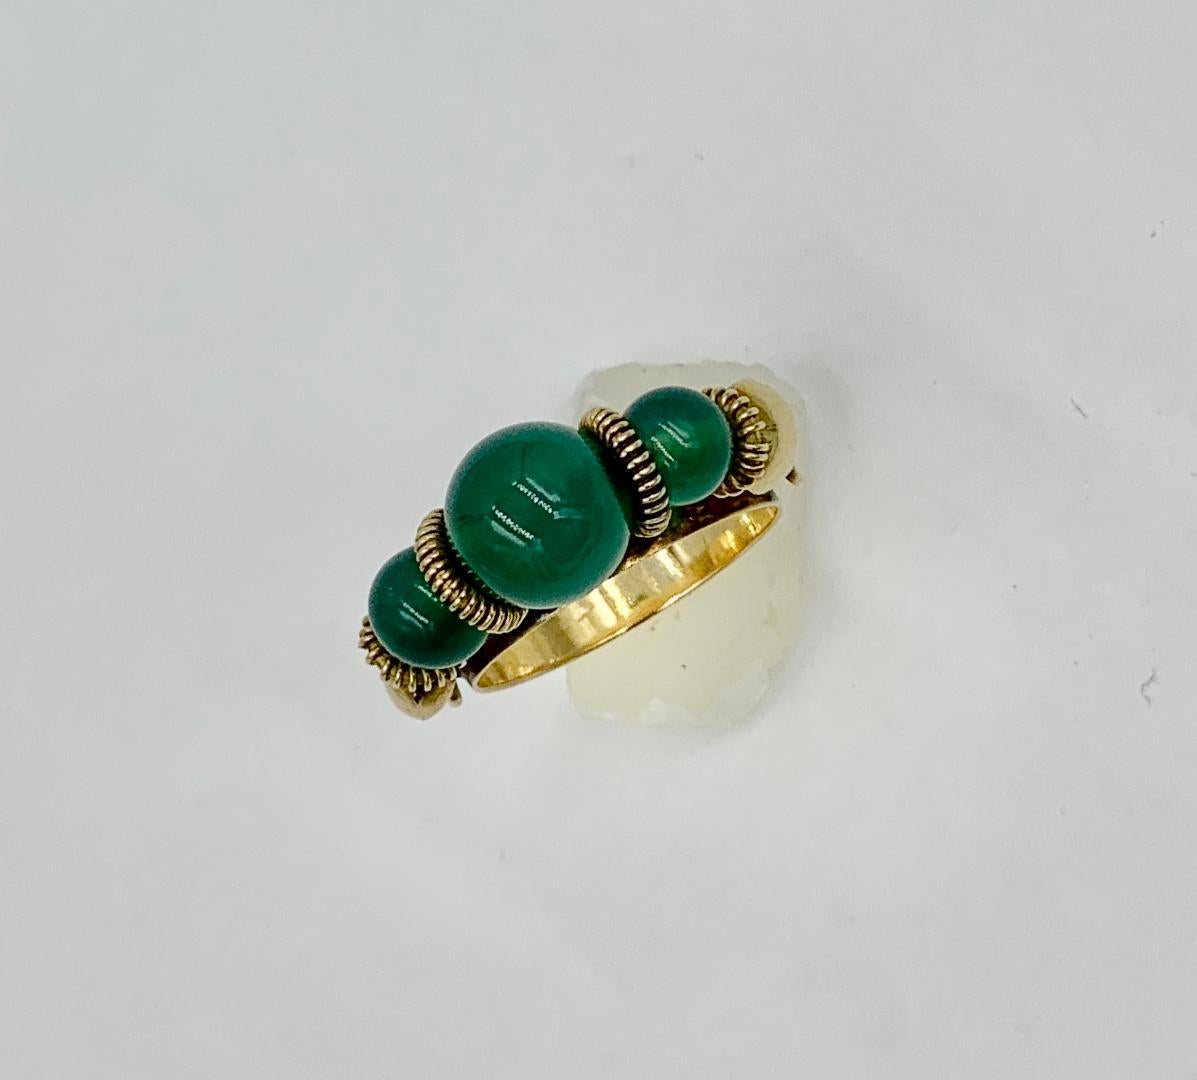 A wonderful Mid-Century Modern Jadeite Jade Ring with stunning Jade Beads which spin along the top of the ring in 18 Karat Yellow Gold.  The ring is just wonderful and in a Moghul style.  The Jade beads are interspersed with 18 Karat Gold coils. The